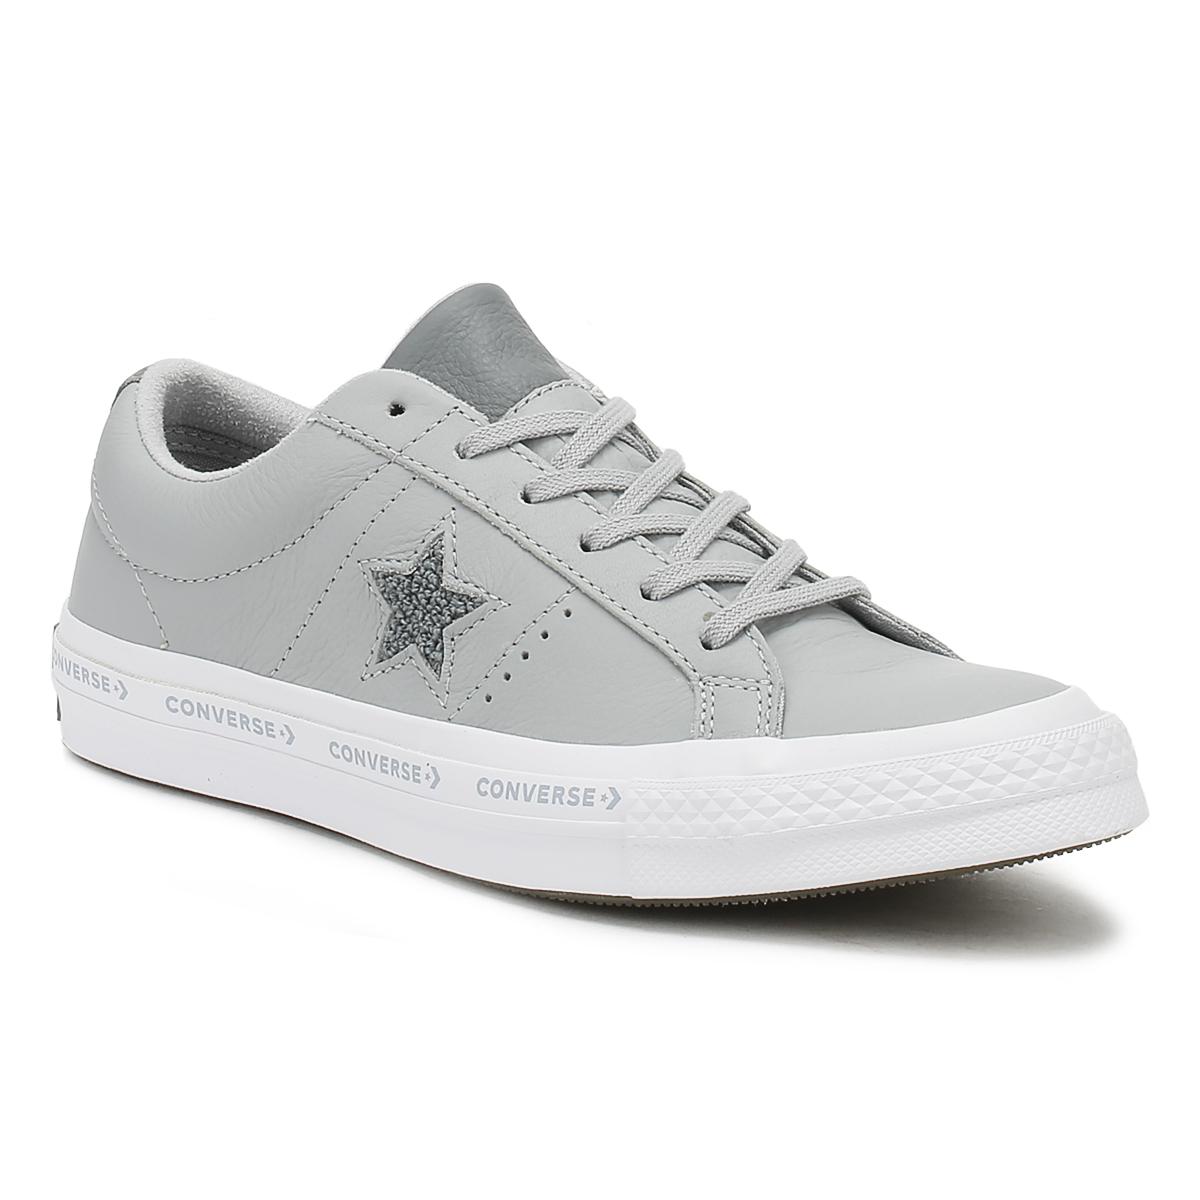 white one star leather ox trainers